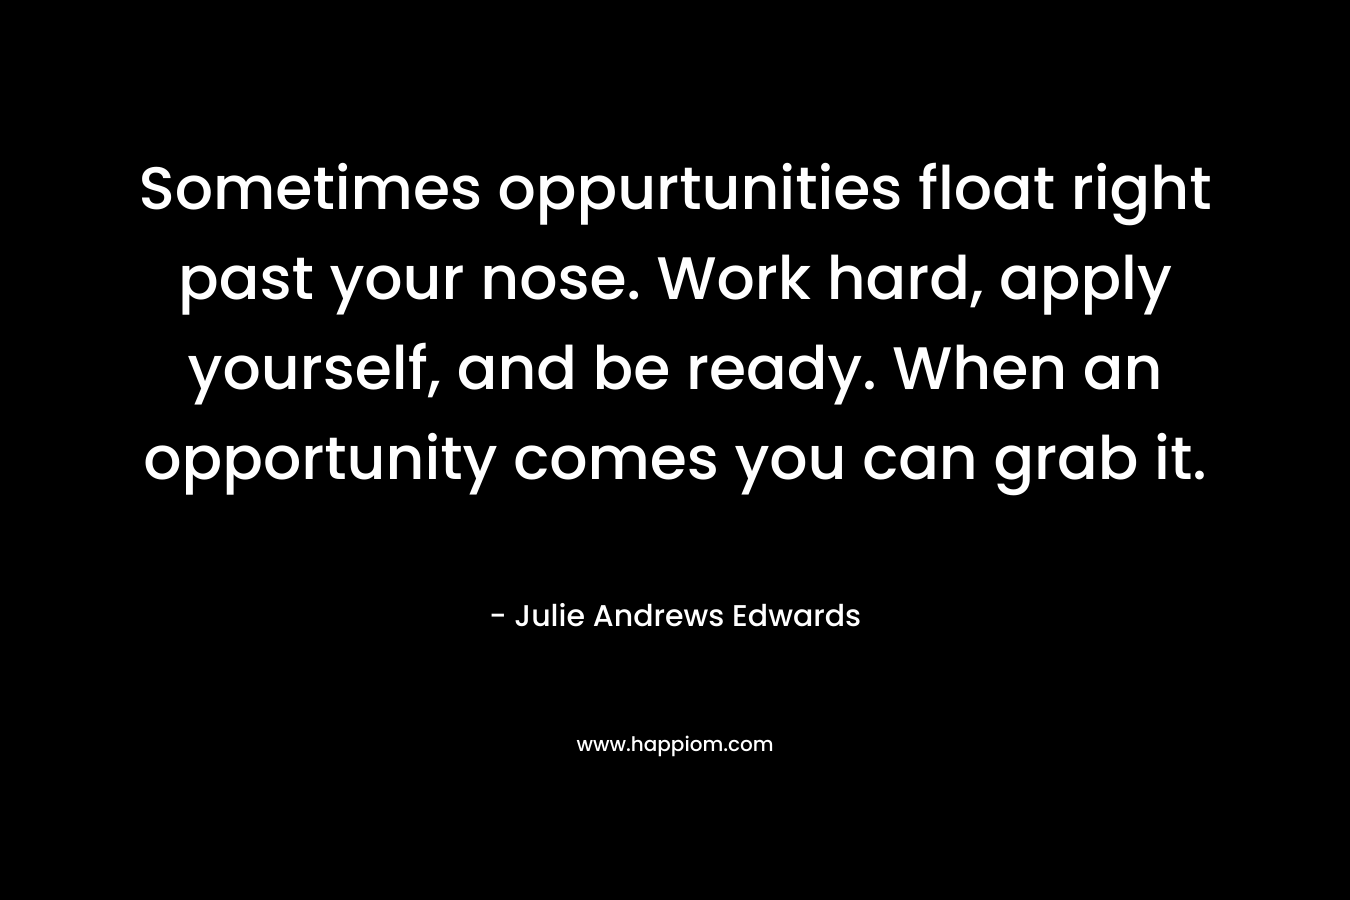 Sometimes oppurtunities float right past your nose. Work hard, apply yourself, and be ready. When an opportunity comes you can grab it. – Julie Andrews Edwards